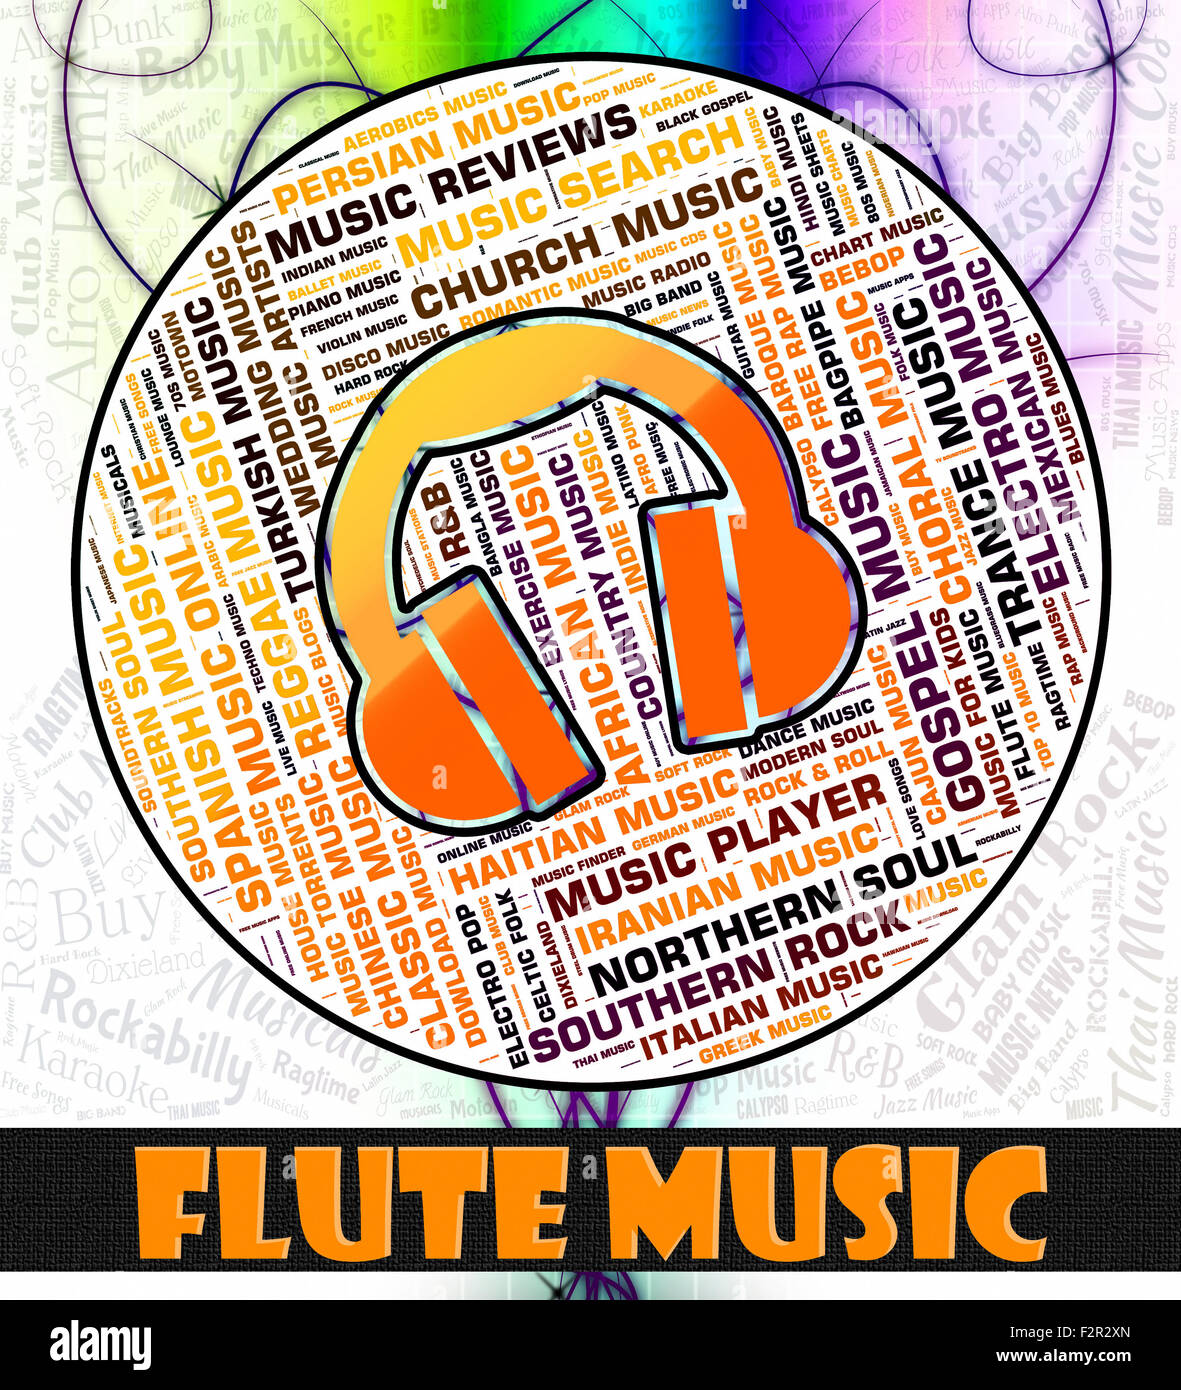 Flute Music Meaning Sound Track And Musical Stock Photo Alamy